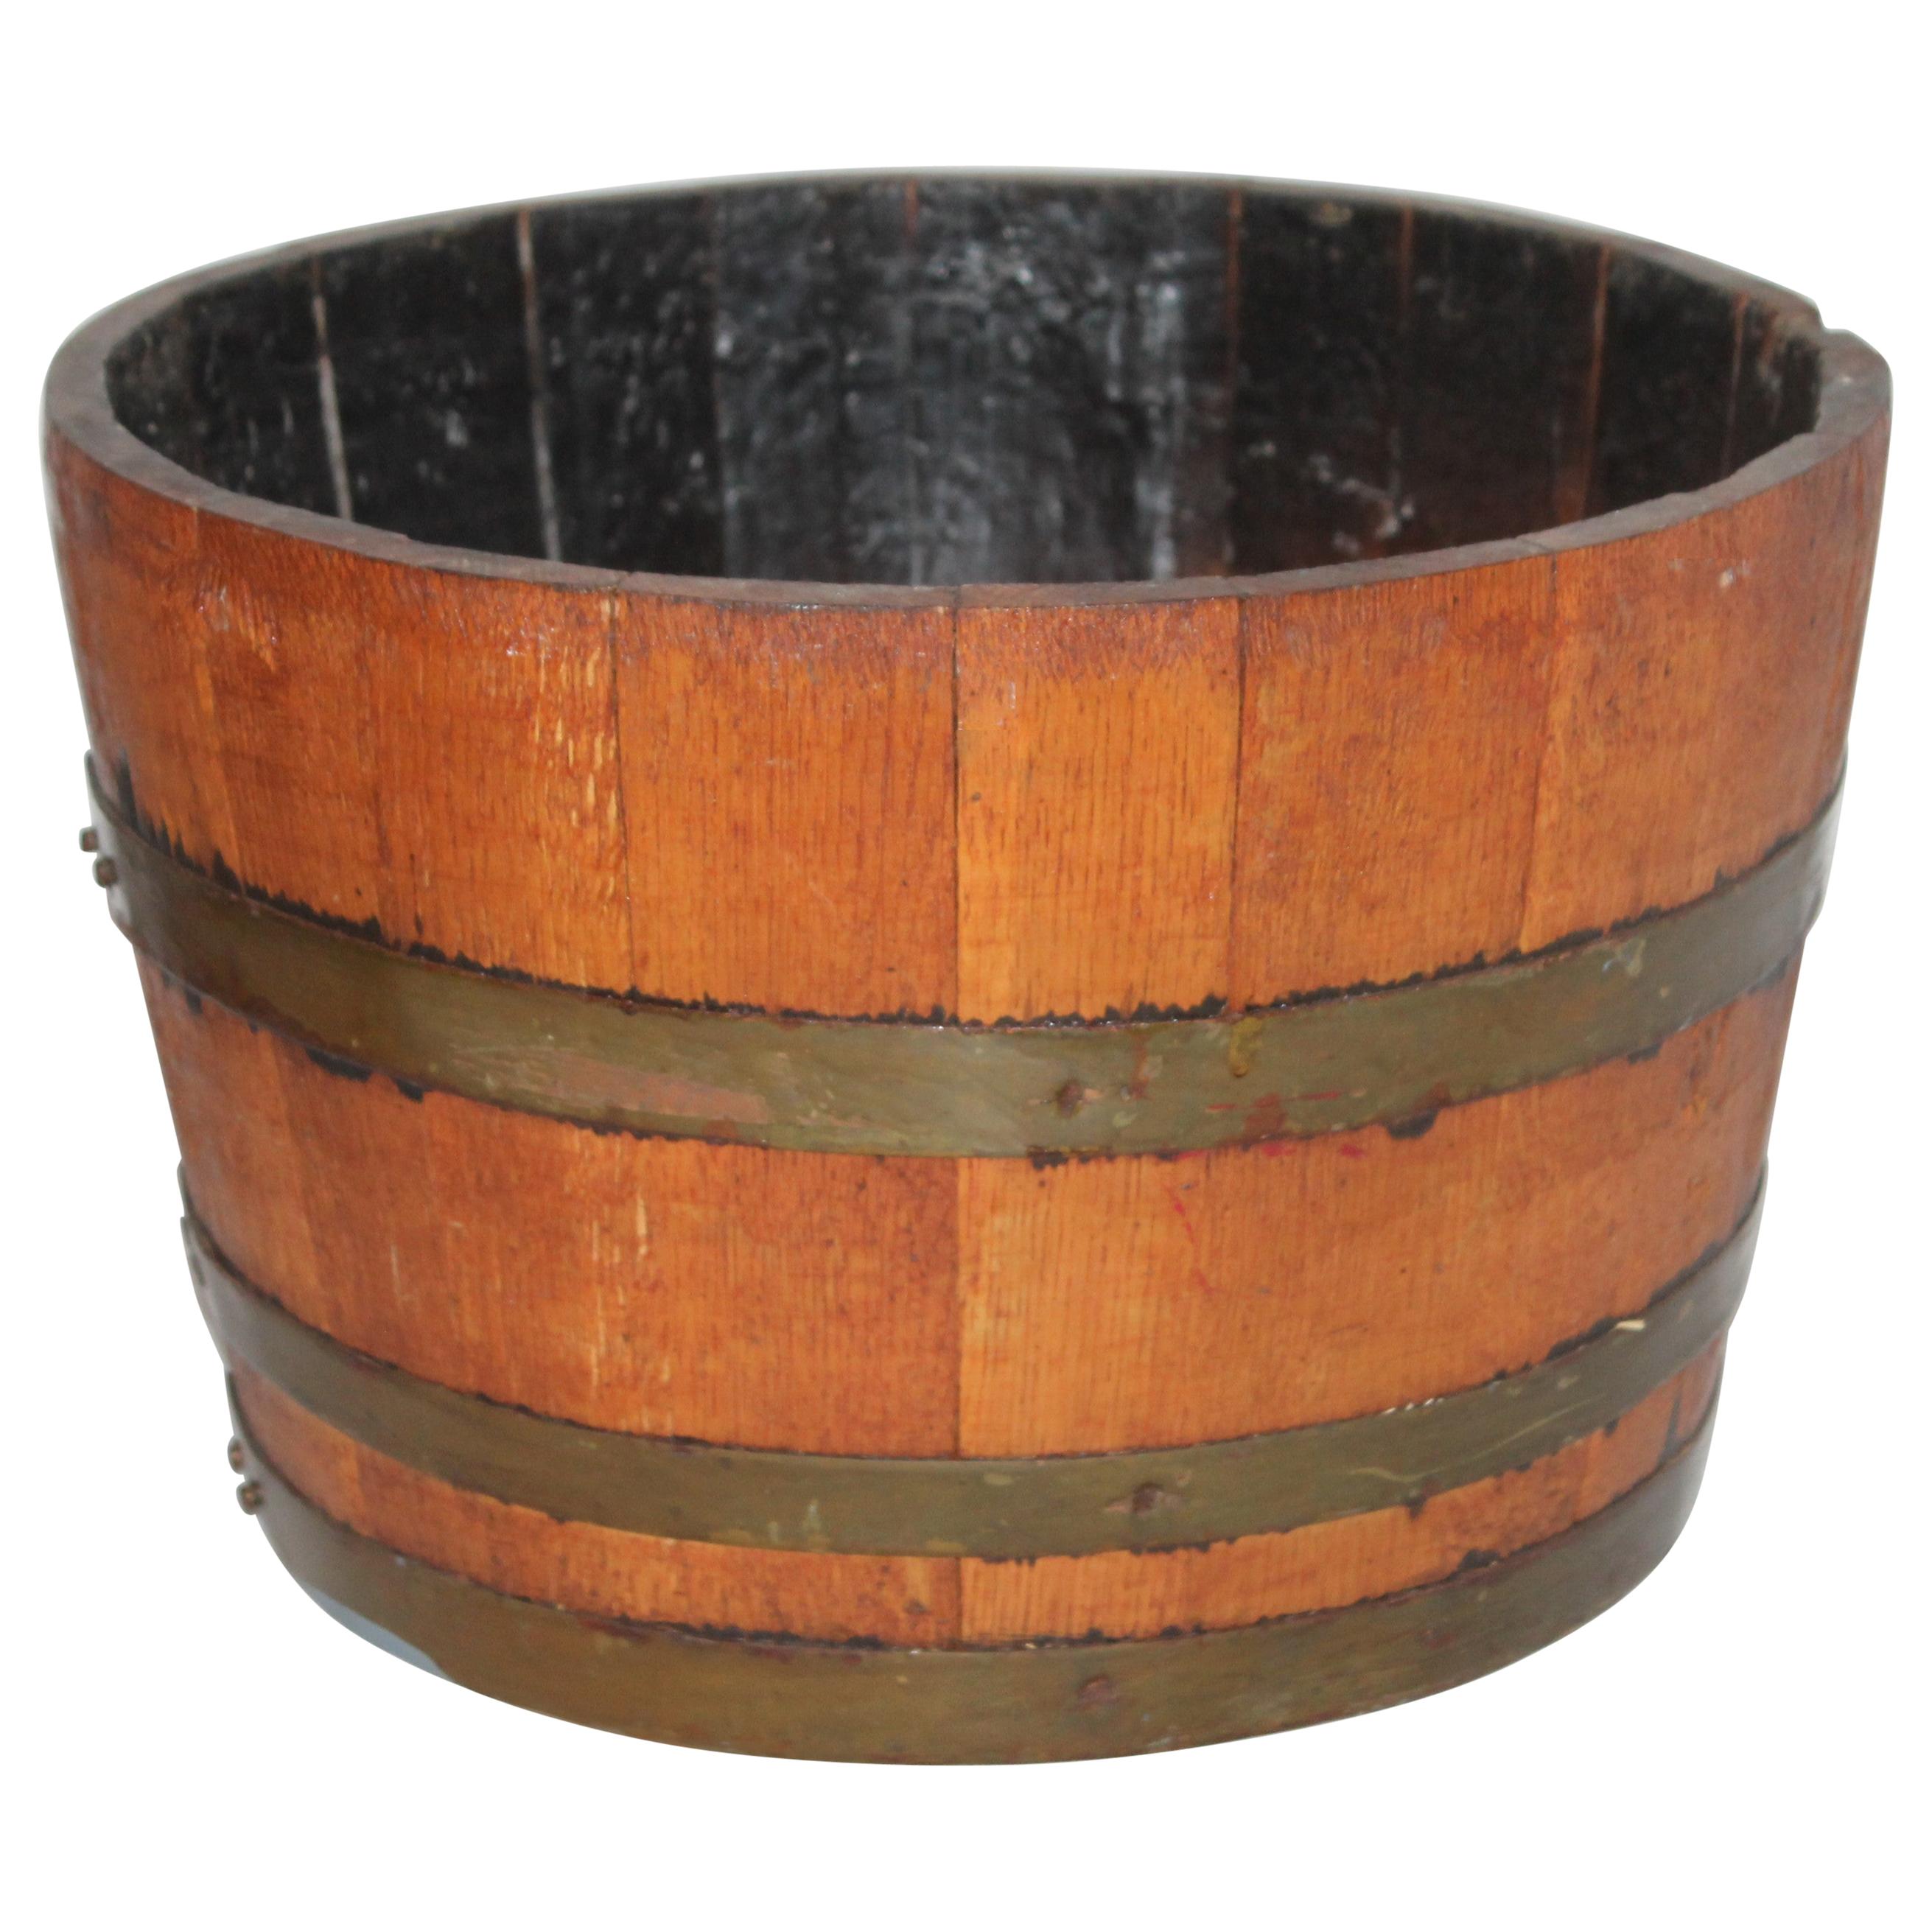 19th Century Wine Barrel / Container for Grapes